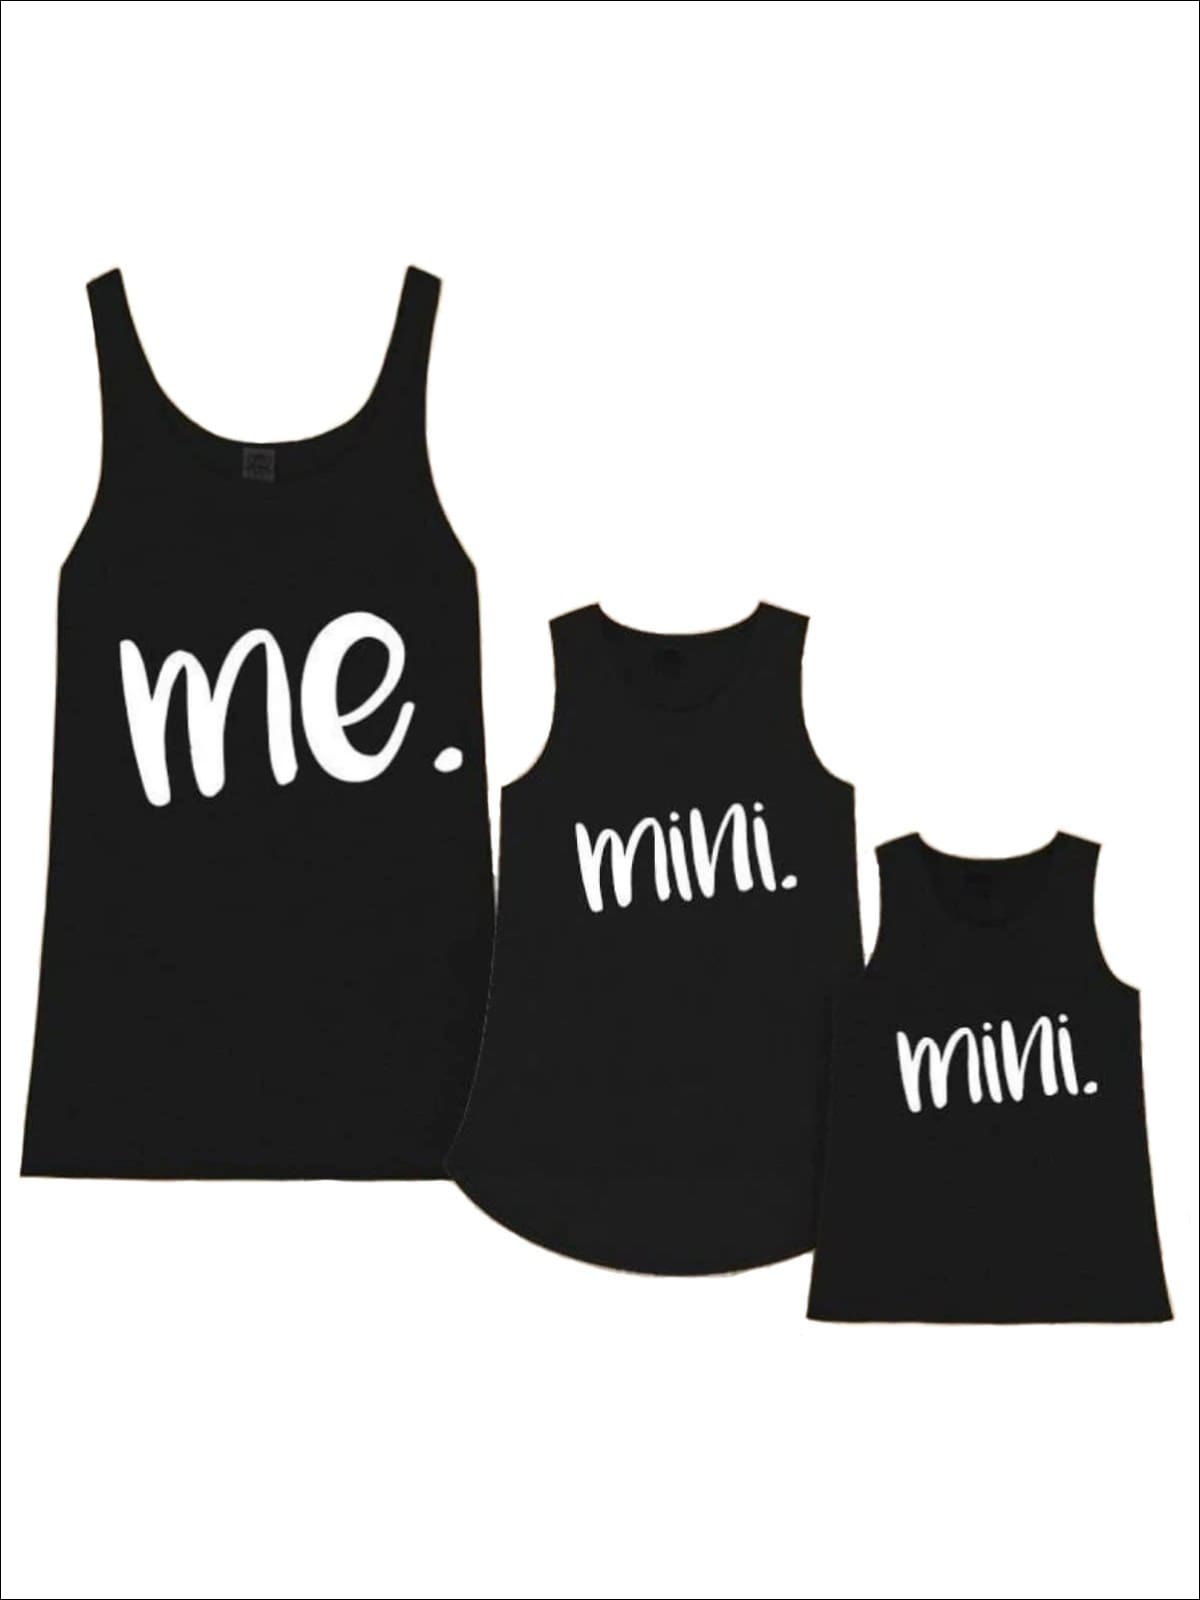 Mommy & Me Black Me & Mini Graphic Tank Top - Black / 2T/3T - Mommy & Me Top